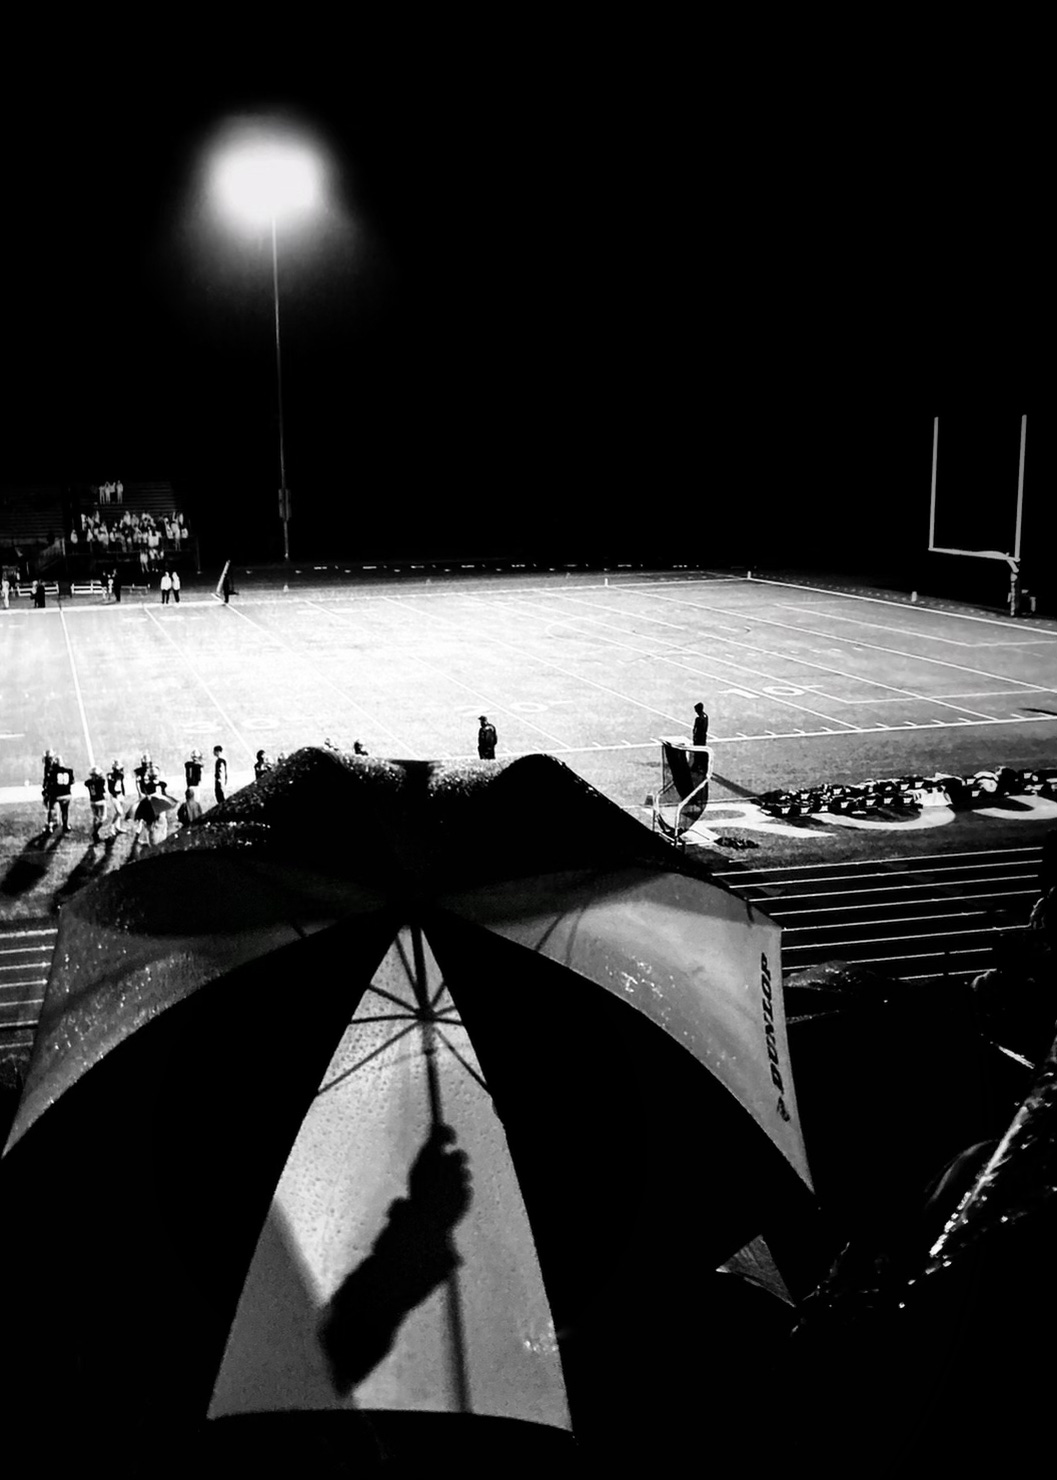 A woman shield by an umbrella rises to her feet in the stands of the football game. A silhouette of her arm holding the umbrella is seen through the backlit umbrella.